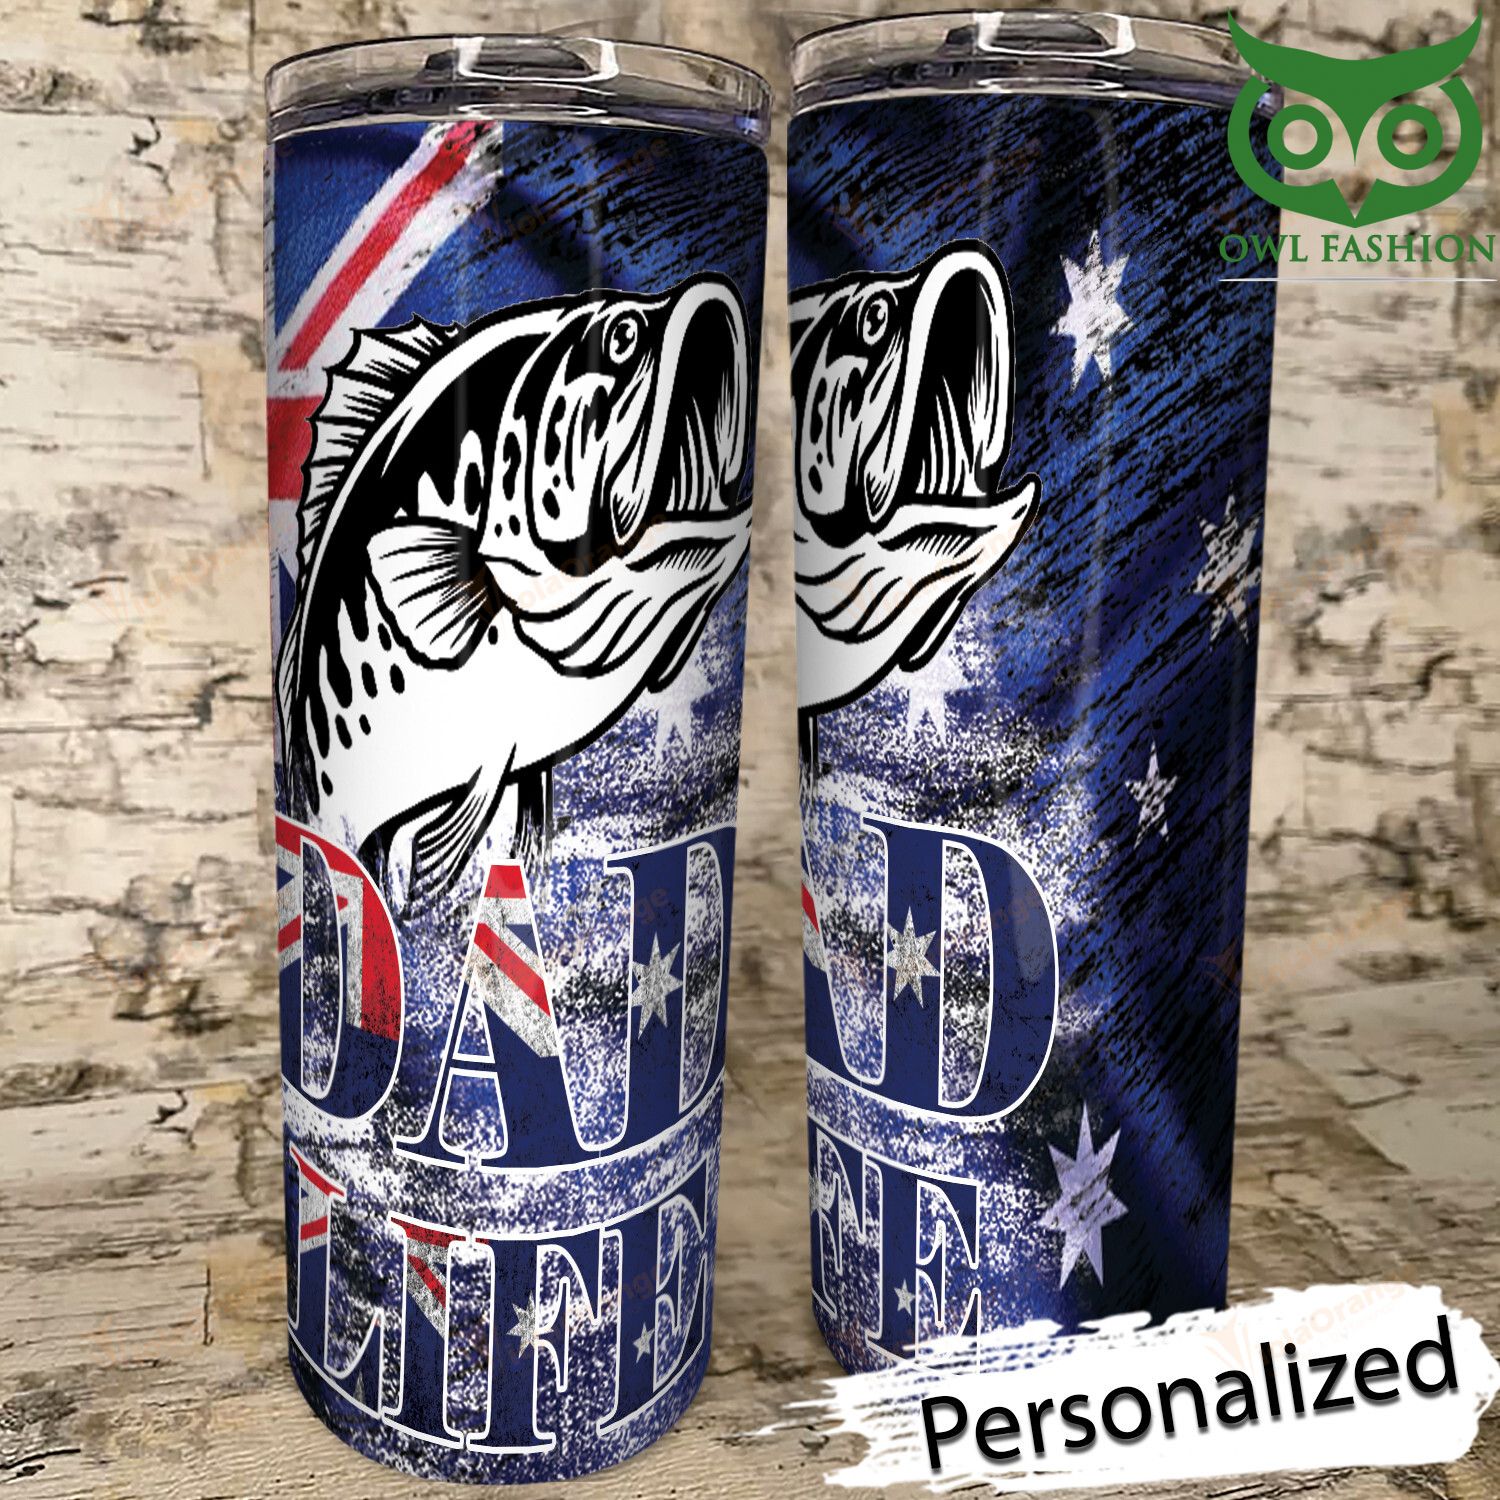 Special design Personalized Aus Fishing skinny tumbler cup